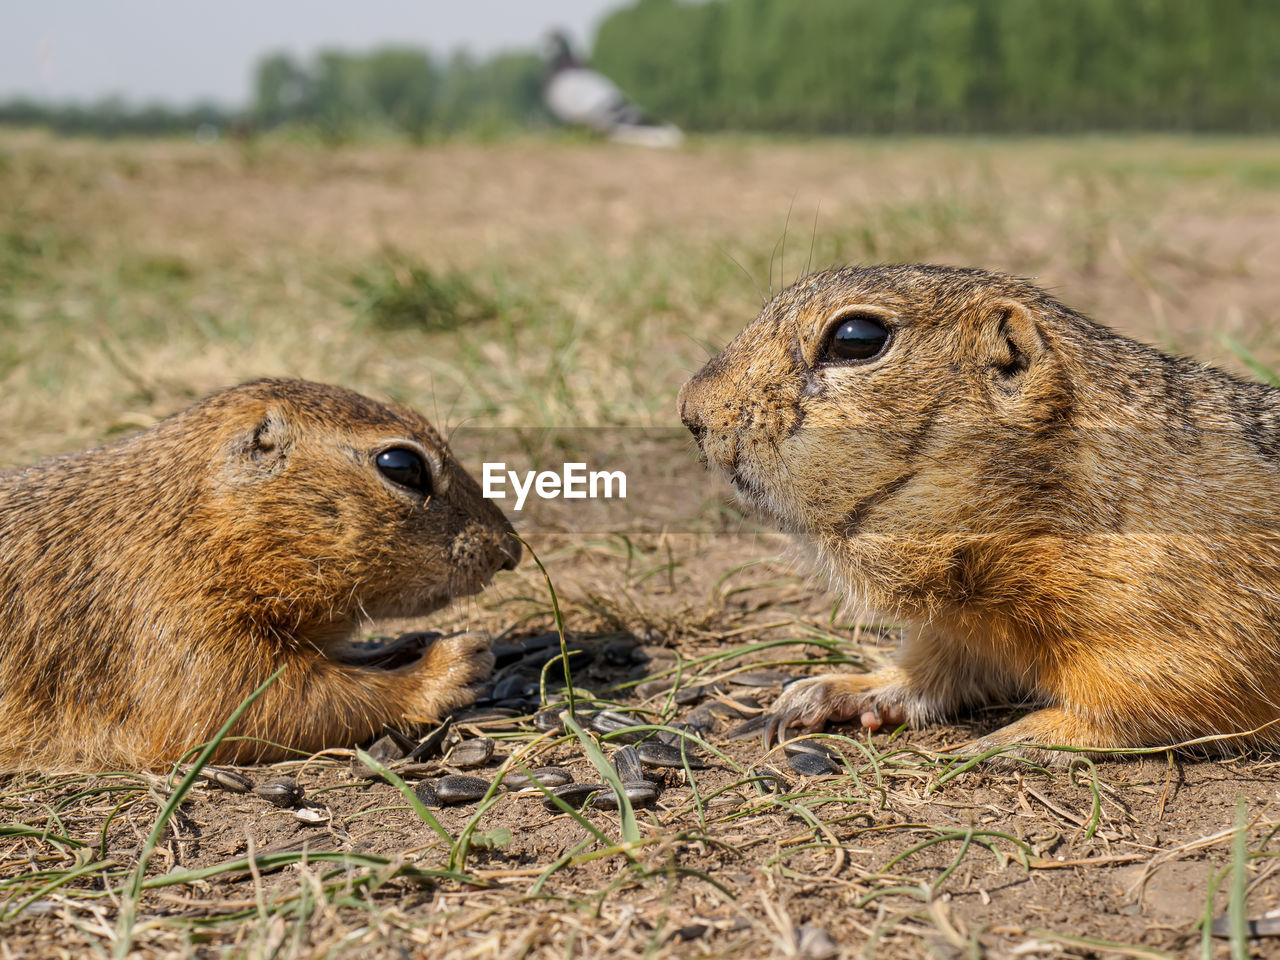 animal, animal themes, animal wildlife, mammal, wildlife, prairie dog, rodent, group of animals, whiskers, squirrel, two animals, no people, nature, eating, togetherness, day, close-up, outdoors, side view, pet, grass, land, brown, focus on foreground, prairie, field, plant